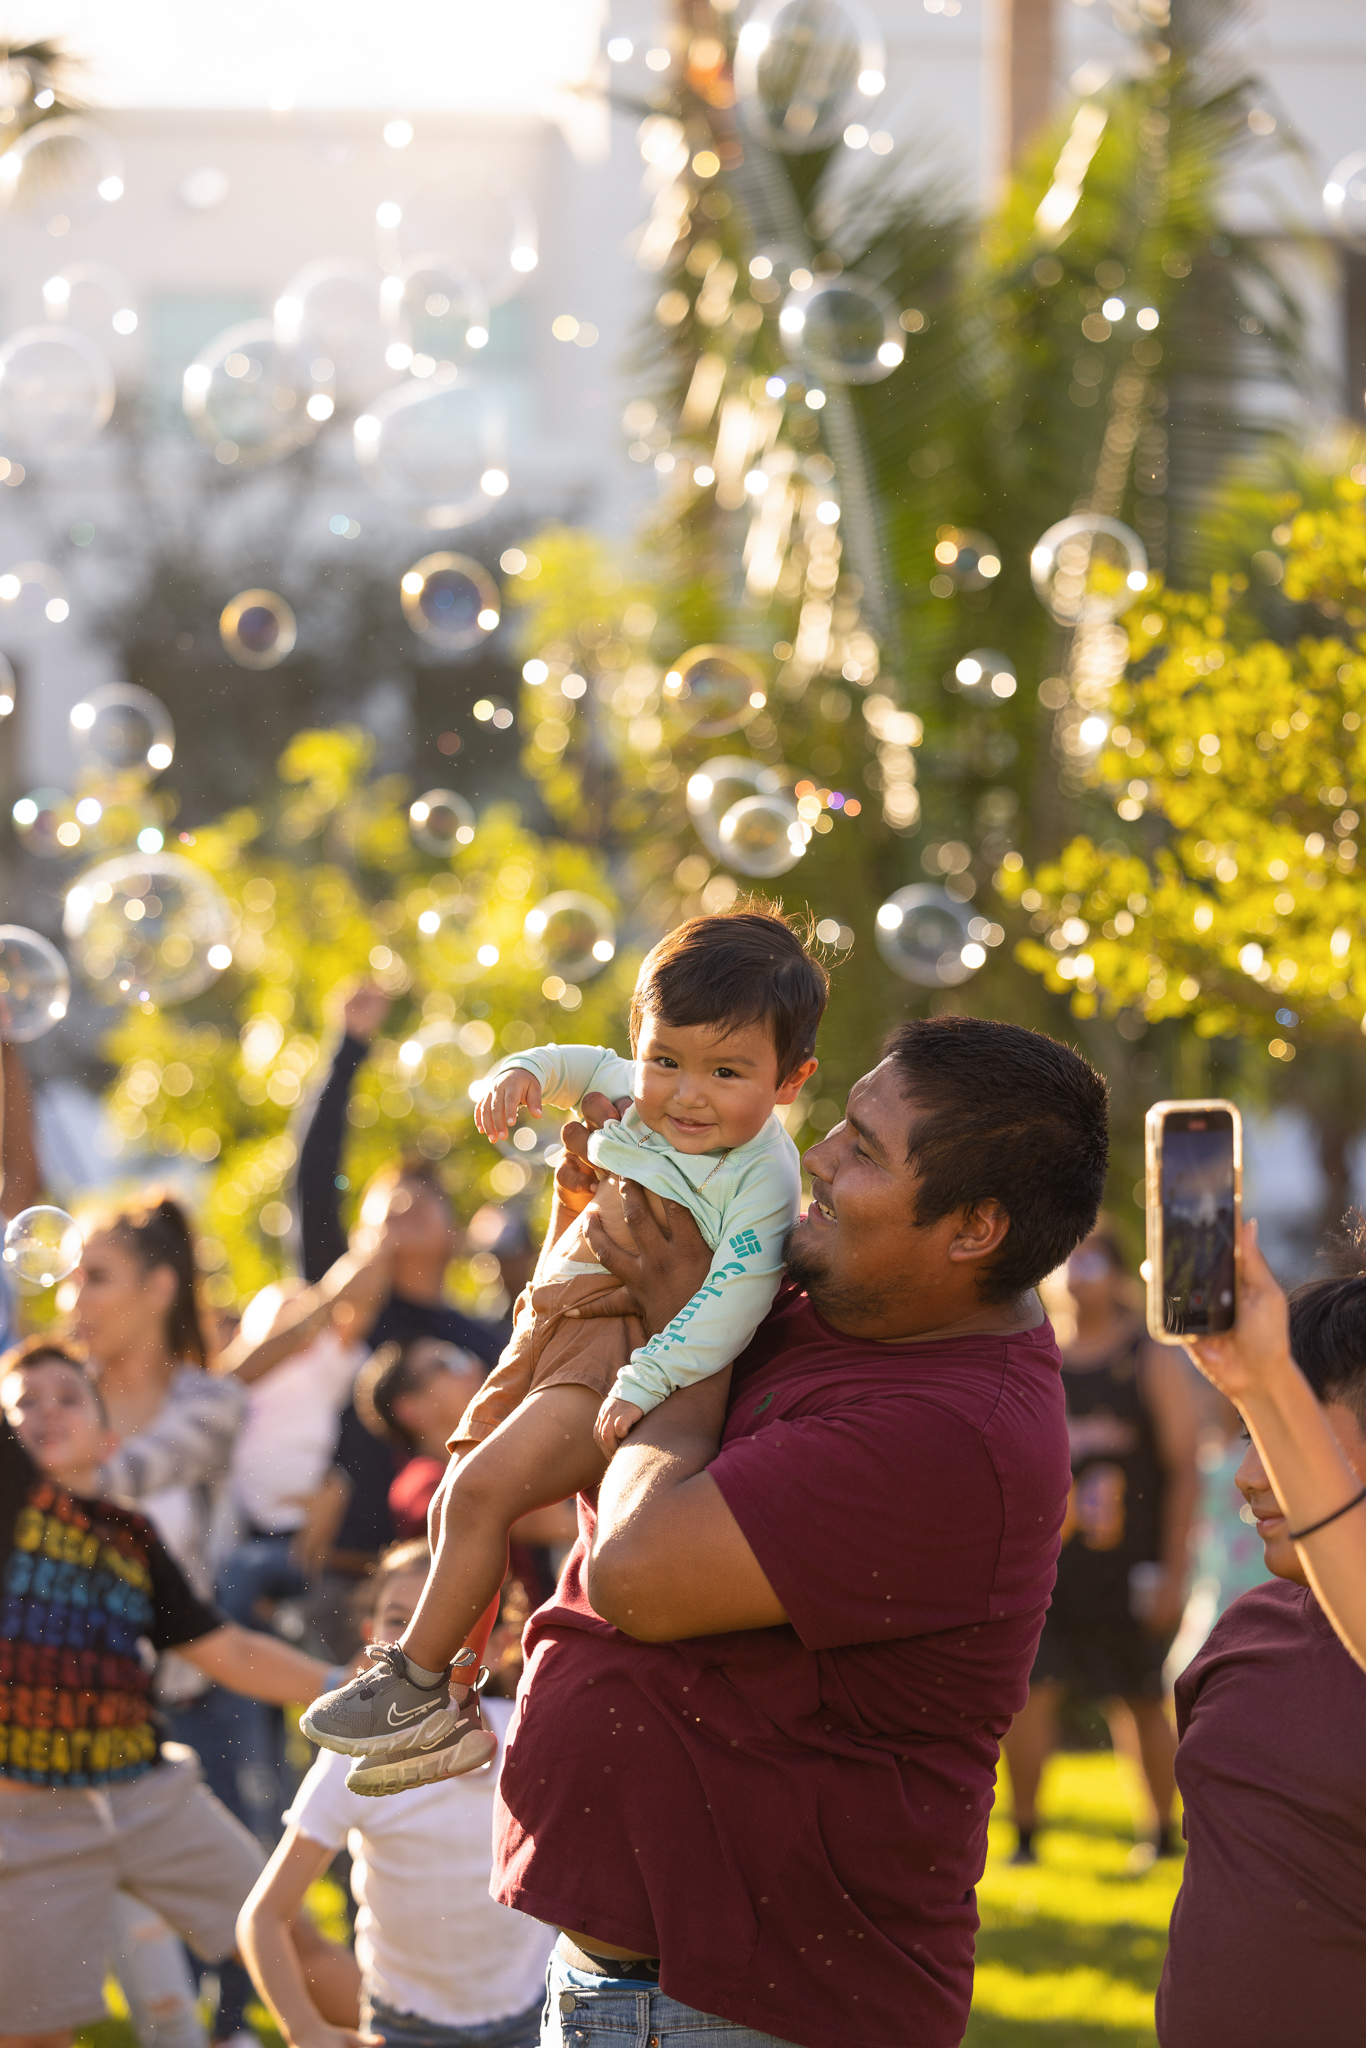 A man holding up a toddler in a crowd of people as someone blows bubbles around them